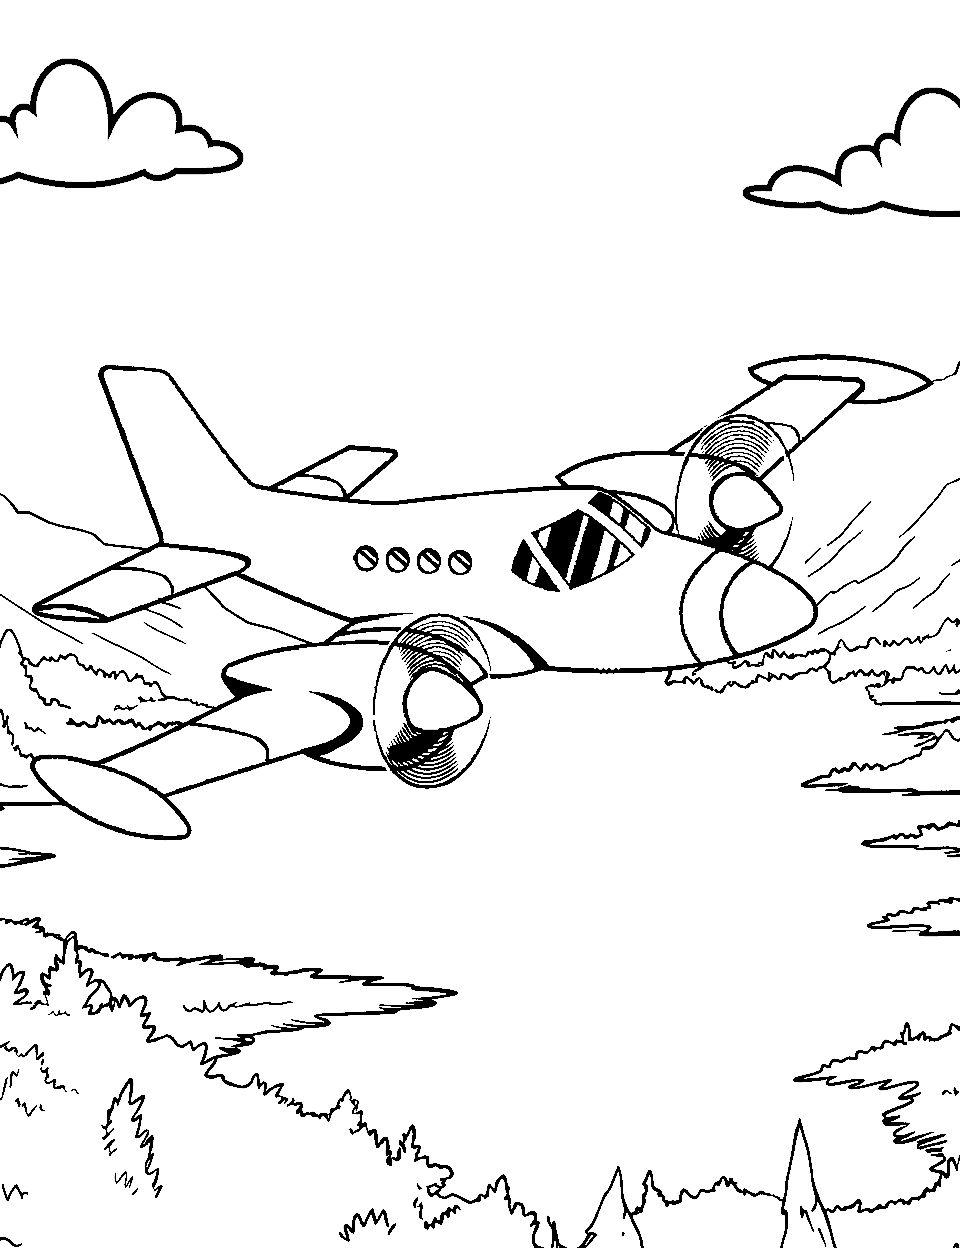 Ultralight Flight Airplane Coloring Page - A small ultralight aircraft flying over a lake.